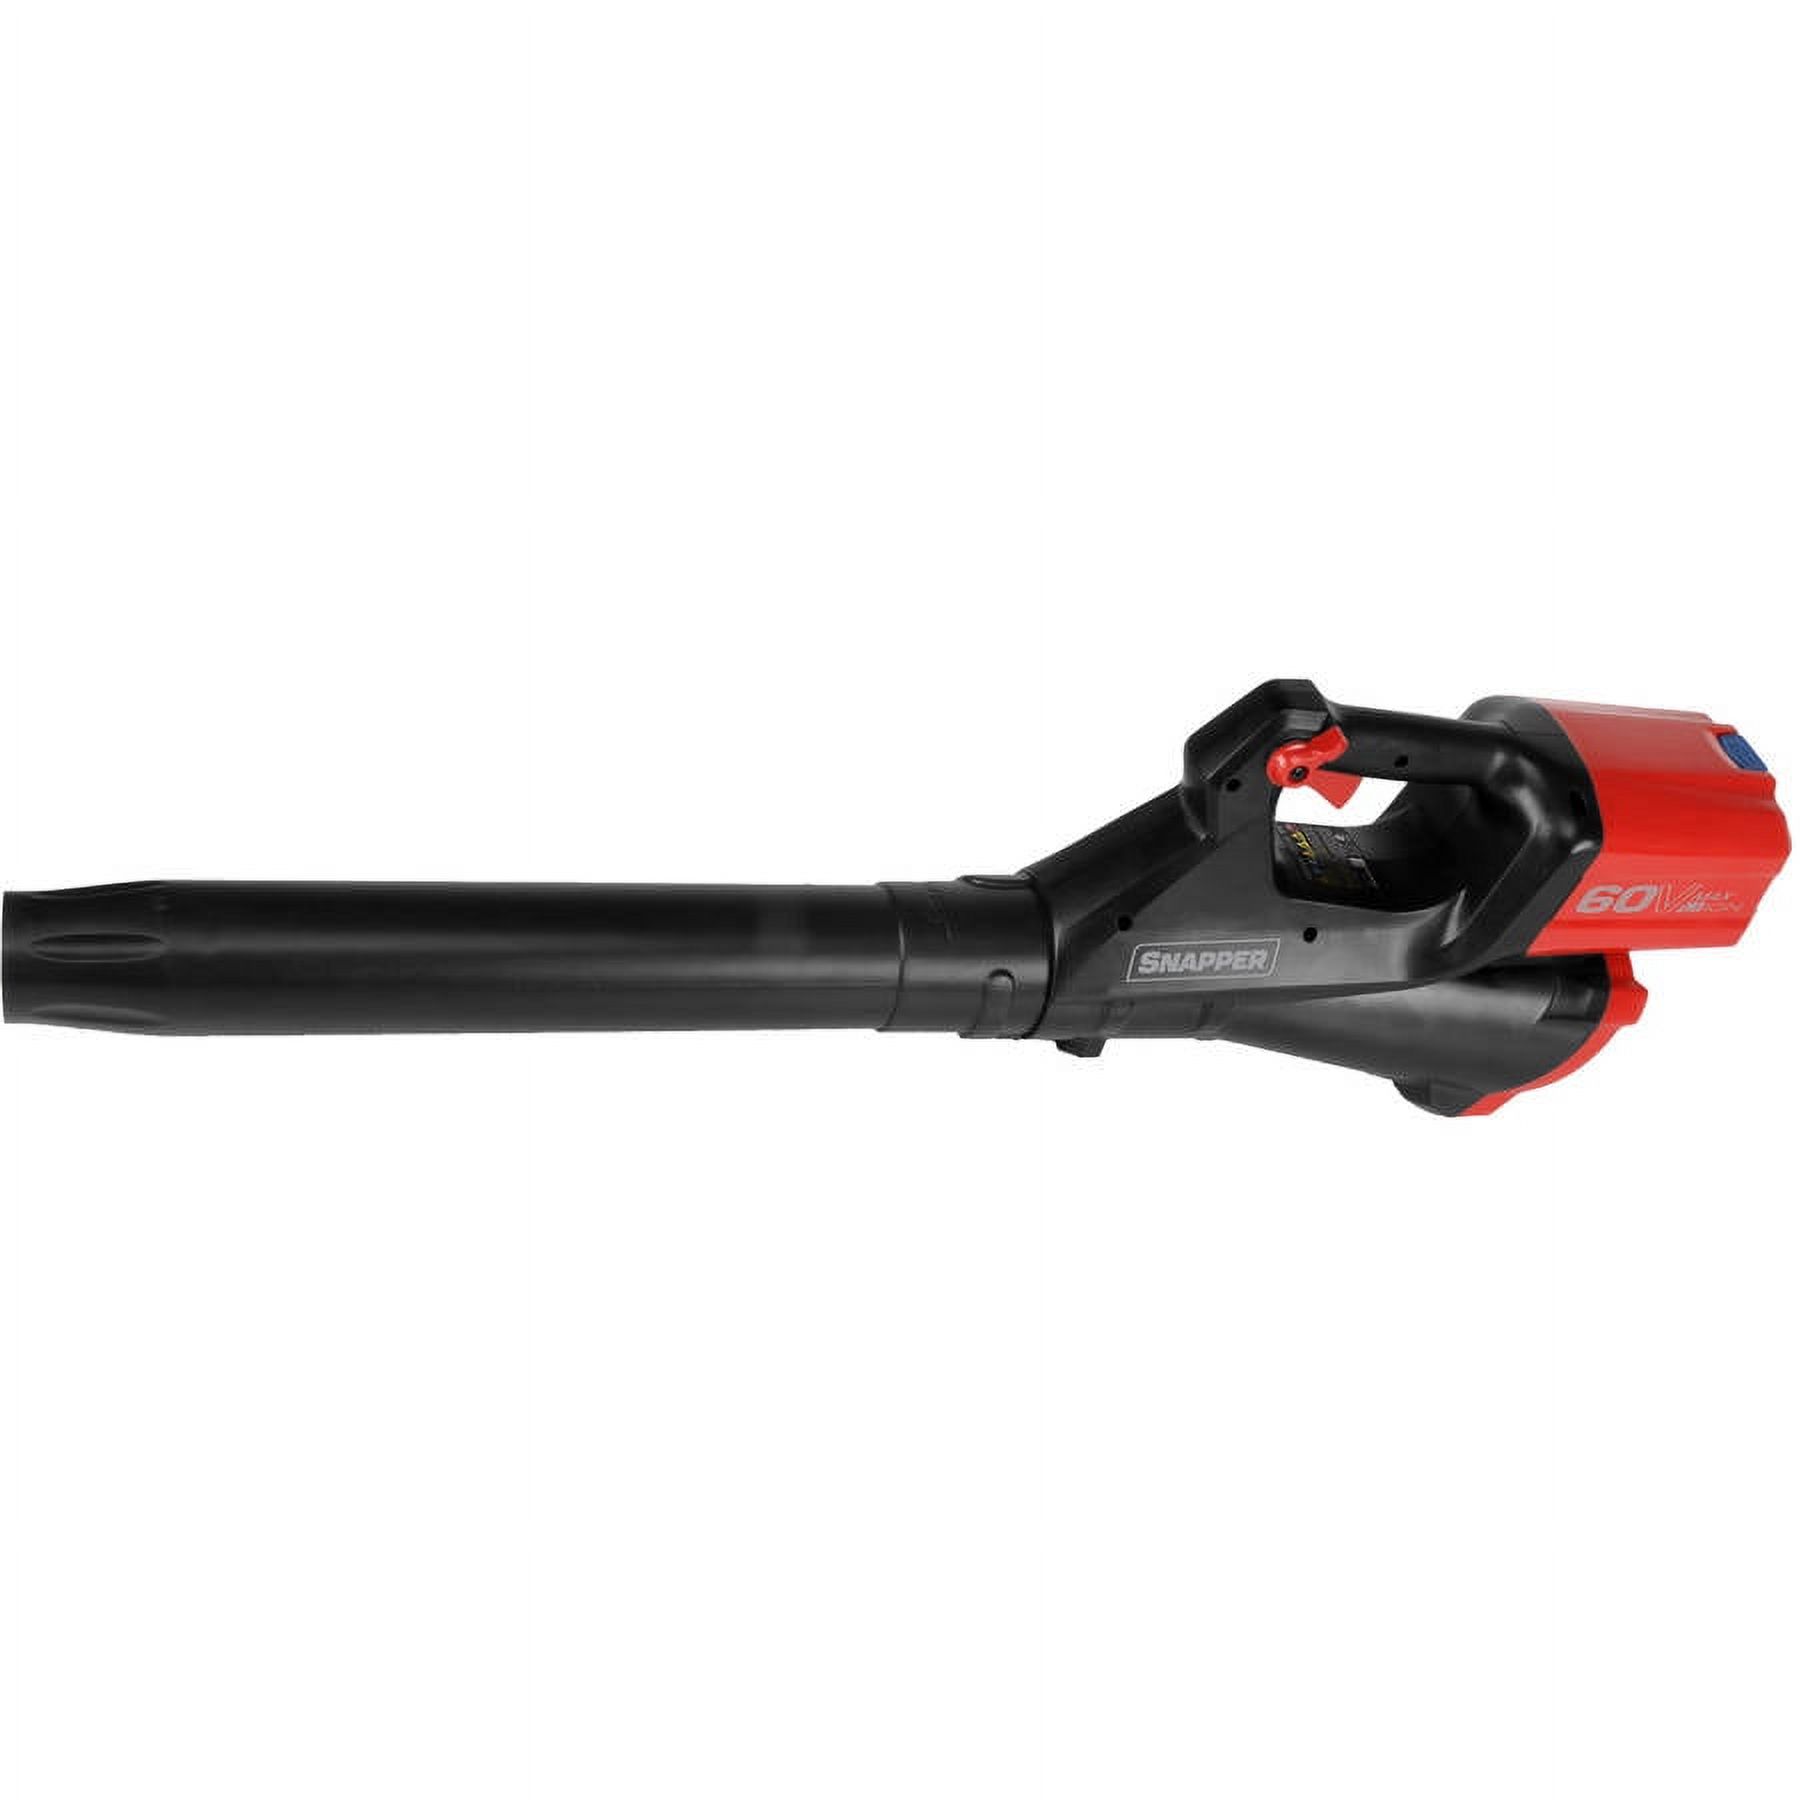 Discontinued - Snapper 60v Leaf Blower, 2Ah Battery and Charger Included 2400119 - image 1 of 5